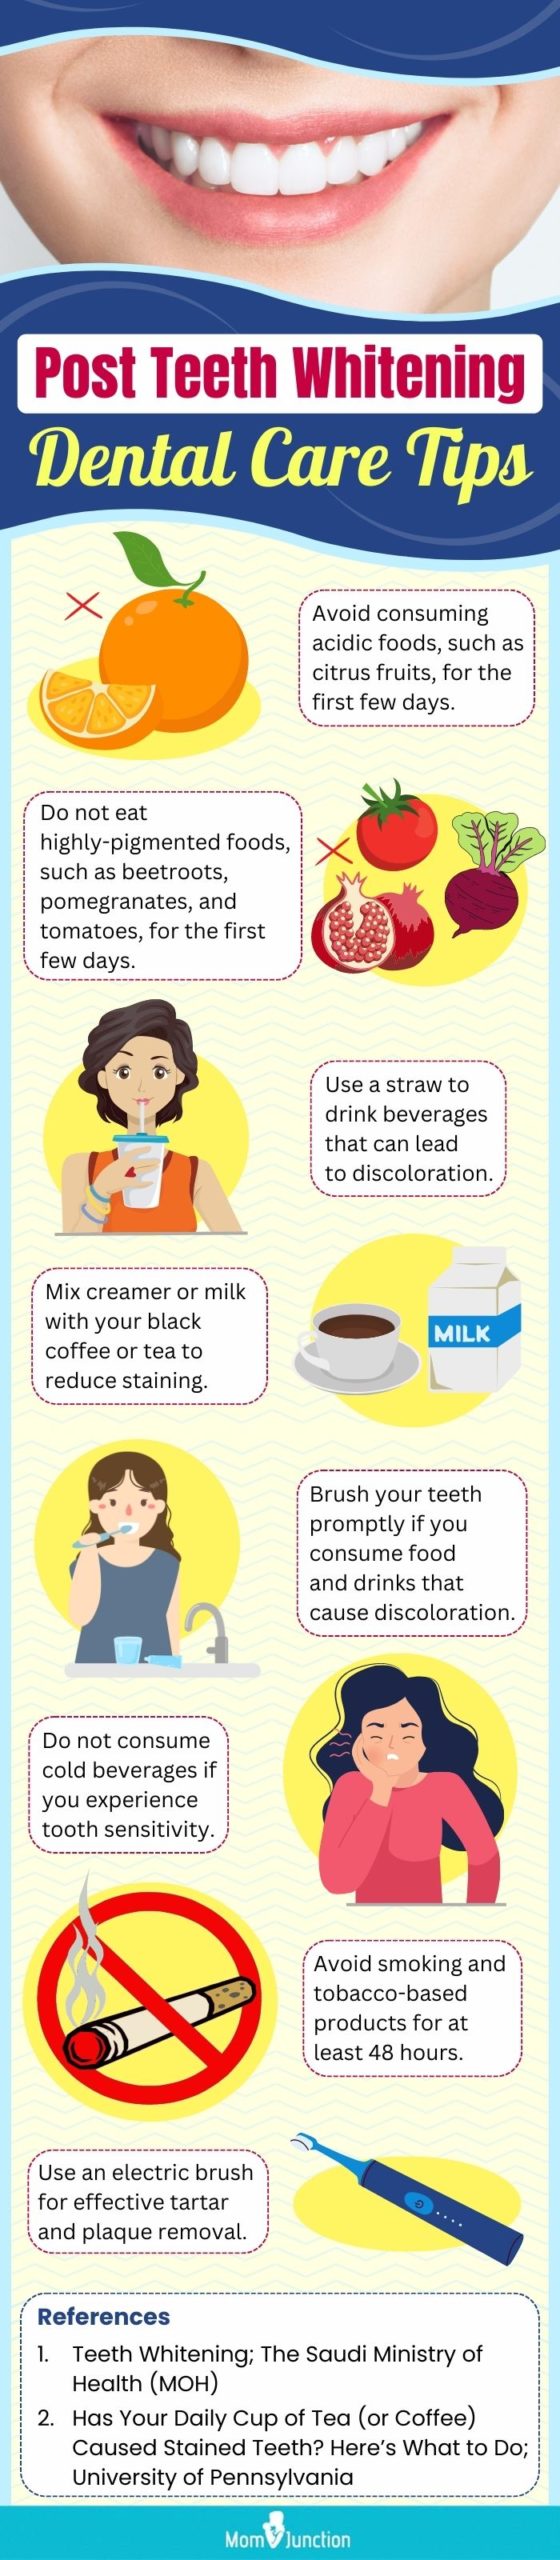 Post Teeth Whitening Dental Care Tips (infographic)